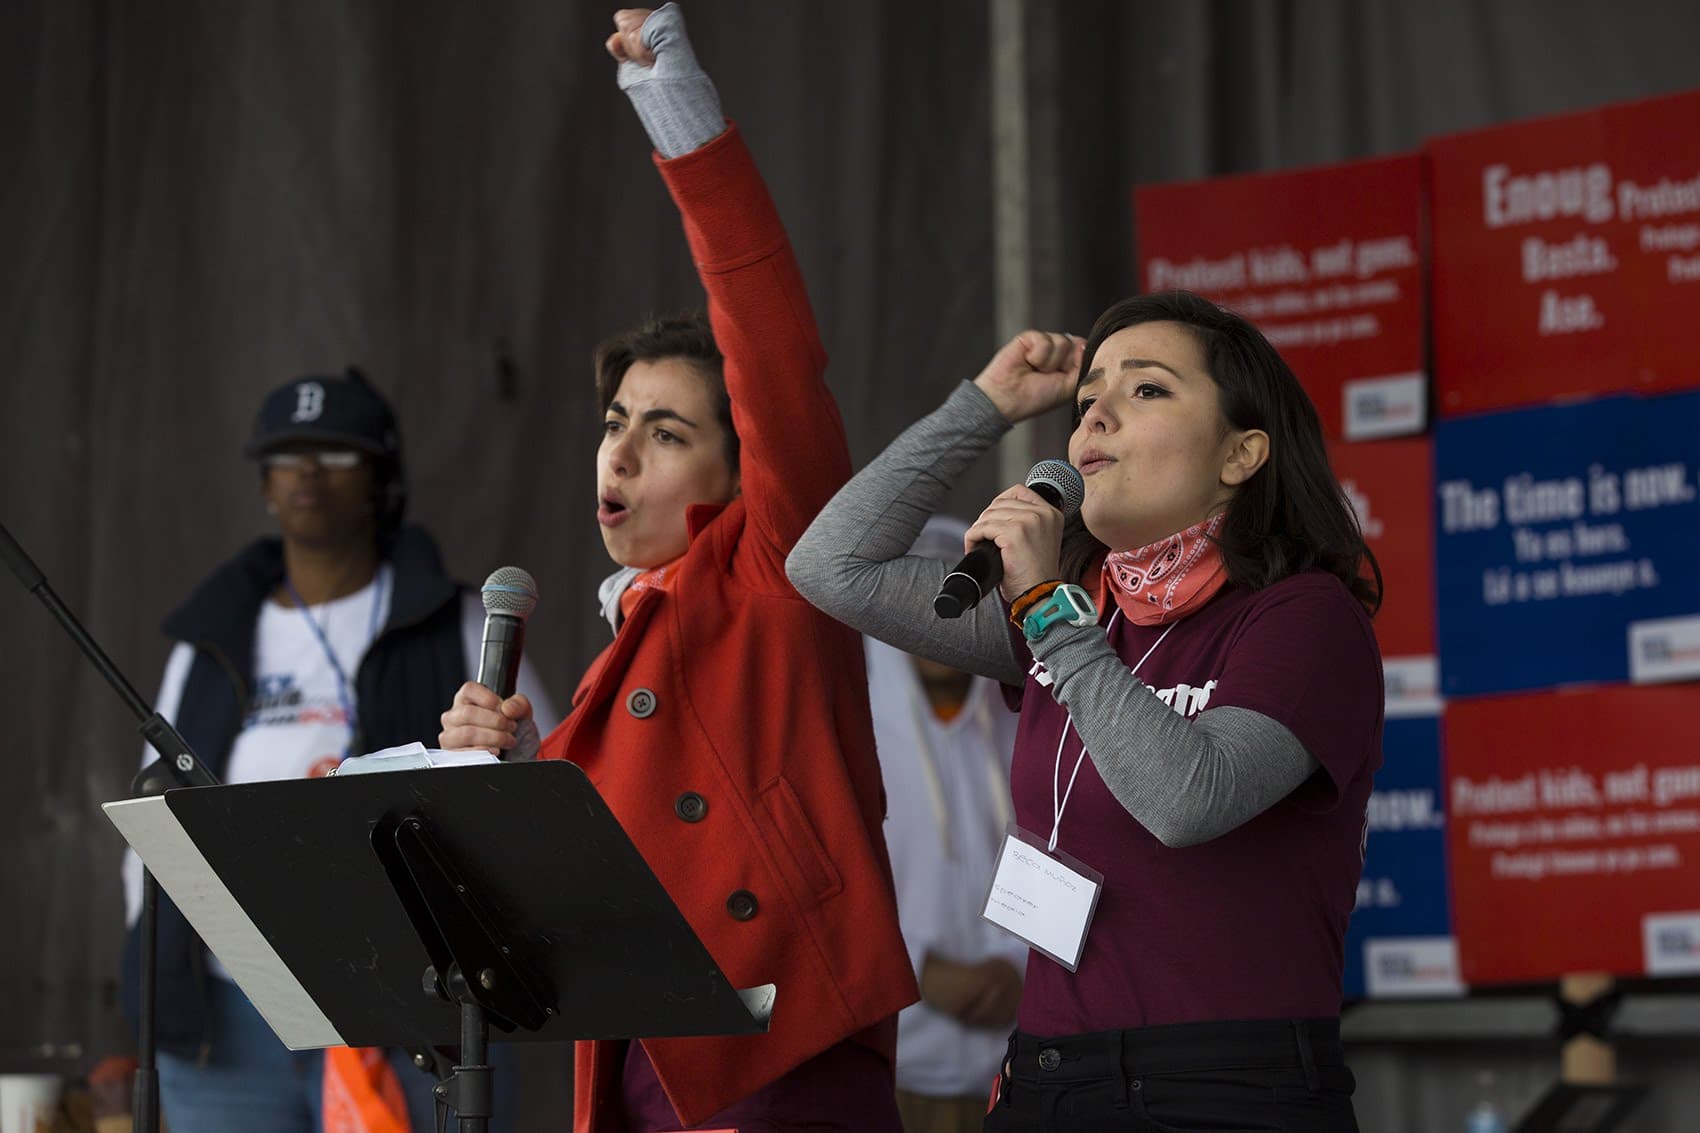 Sisters Leonor Muñoz, left, and Beca Muñoz, right, speak to the large crowd at the Boston Common attending the March for Our Lives rally in March. (Jesse Costa/WBUR)